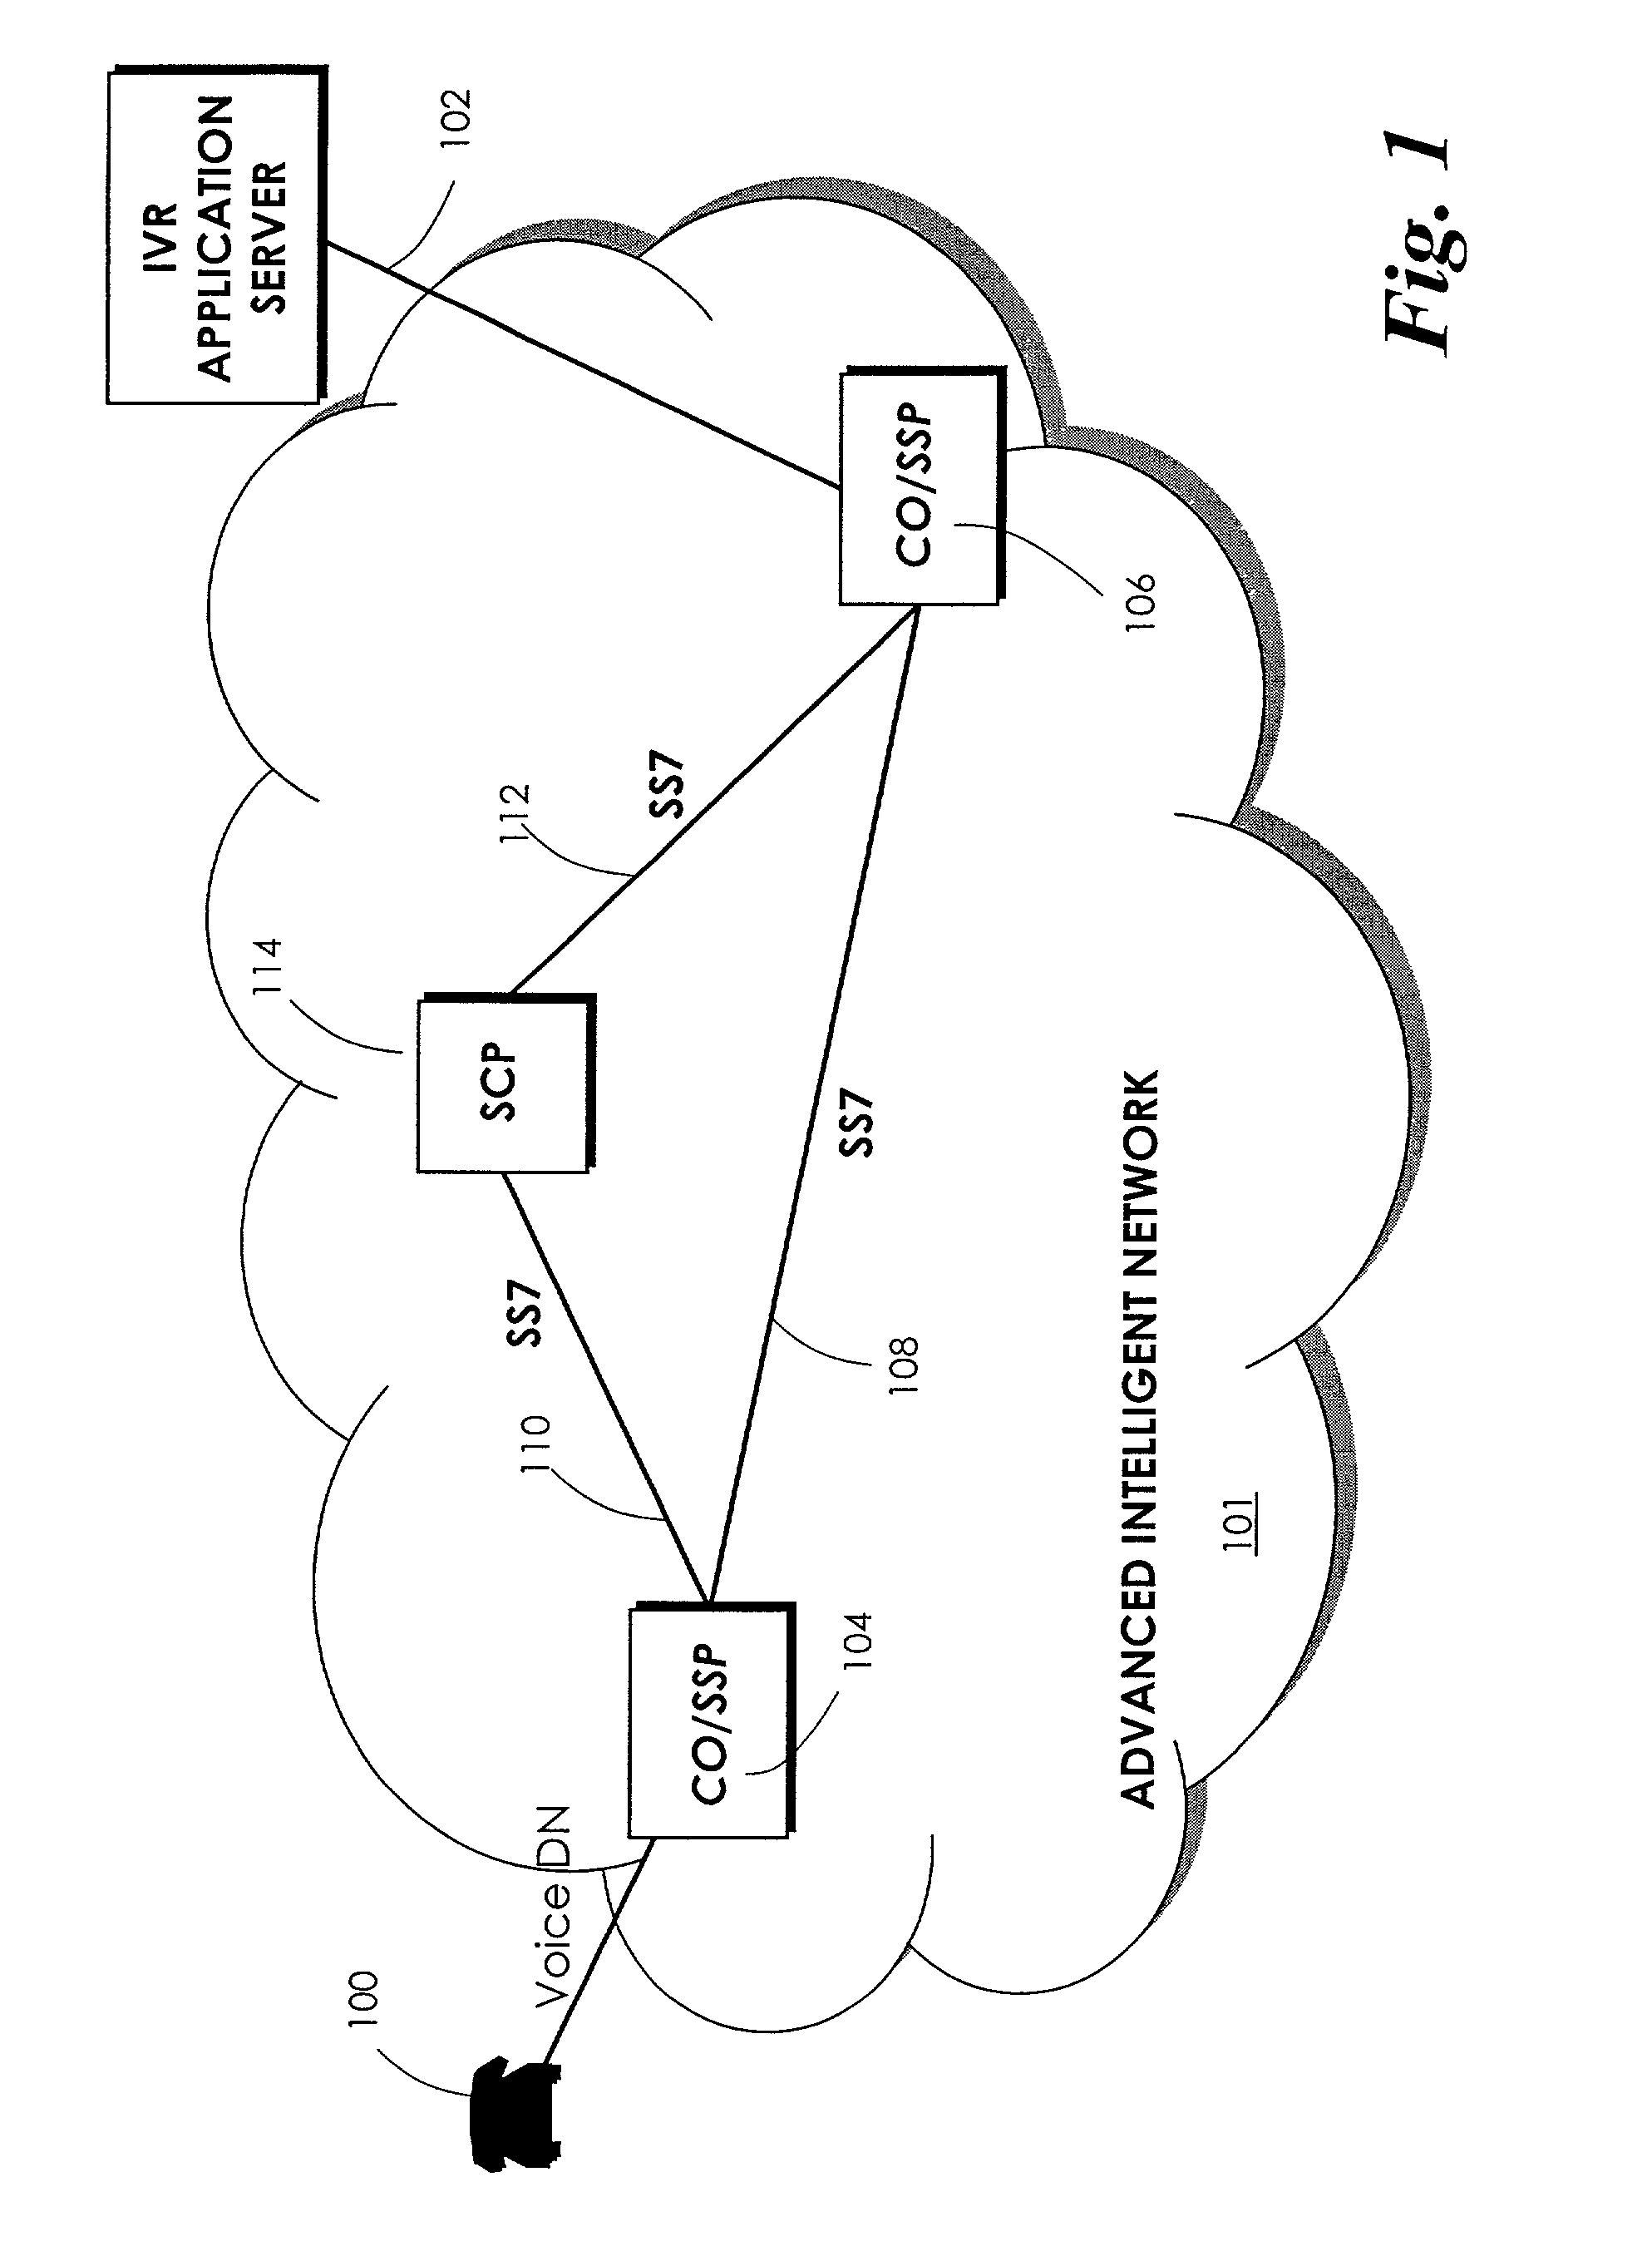 Simultaneous visual and telephonic access to interactive information delivery